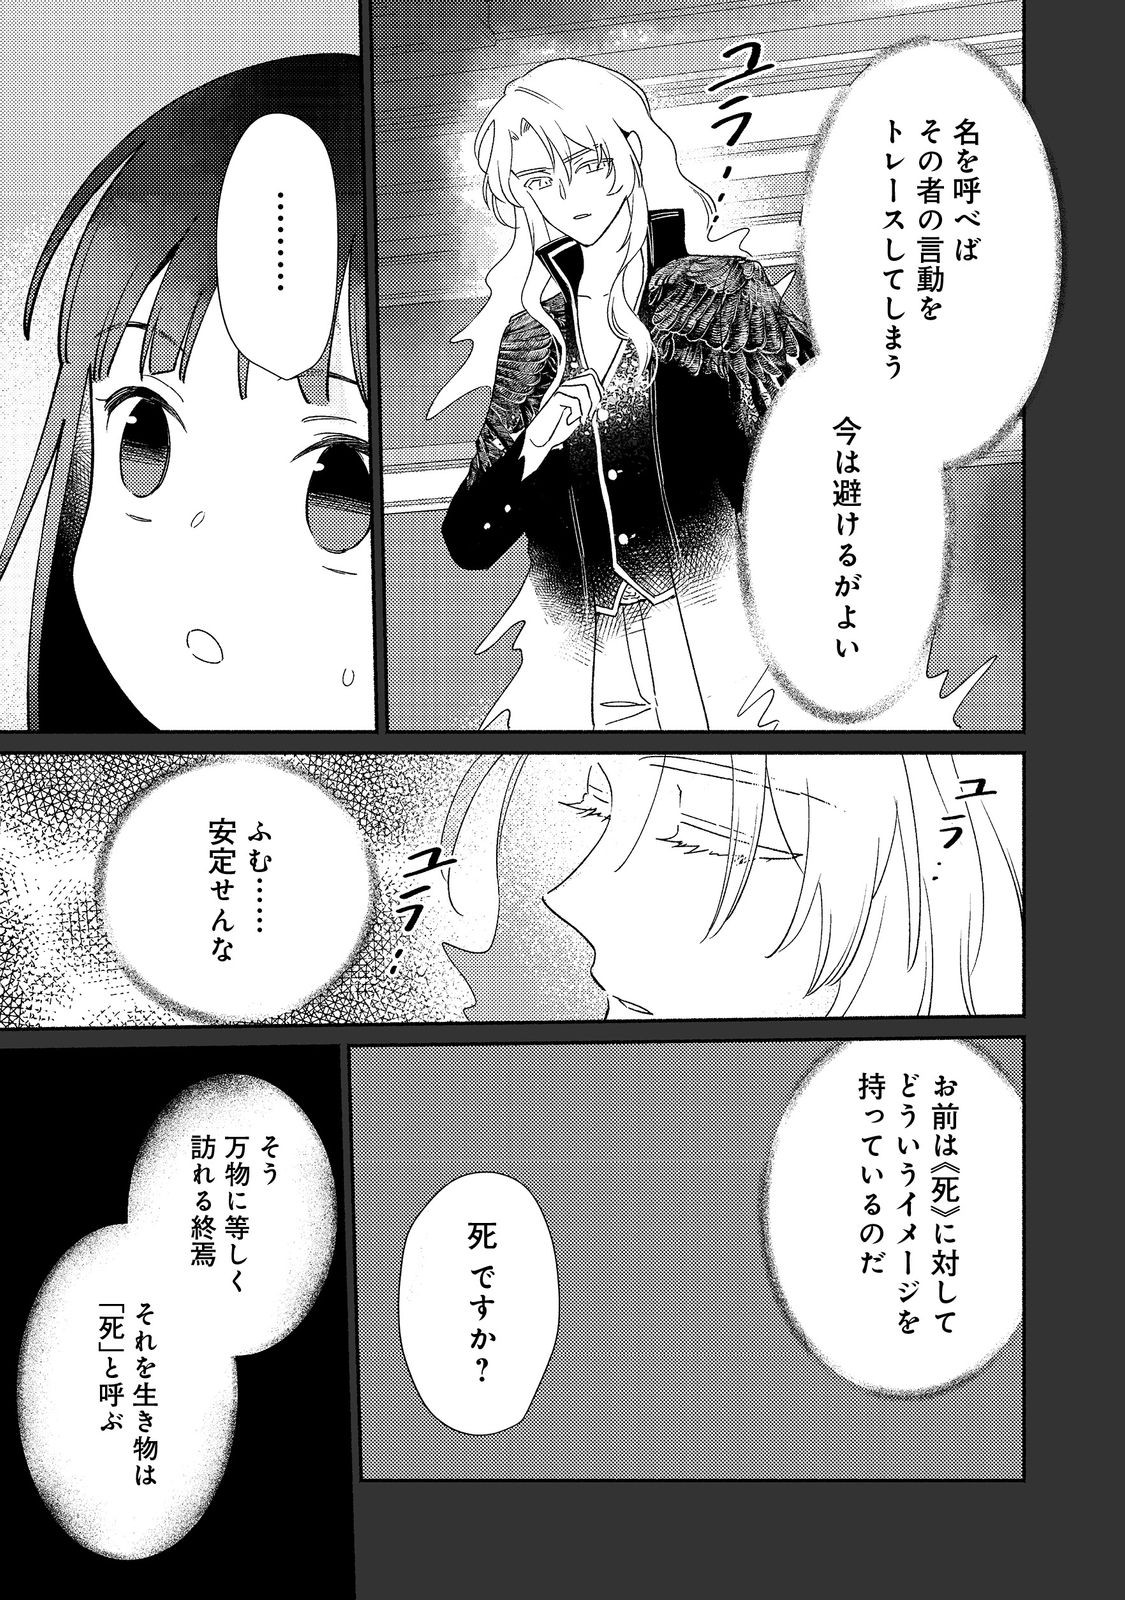 I’m the White Pig Nobleman 第22.1話 - Page 5